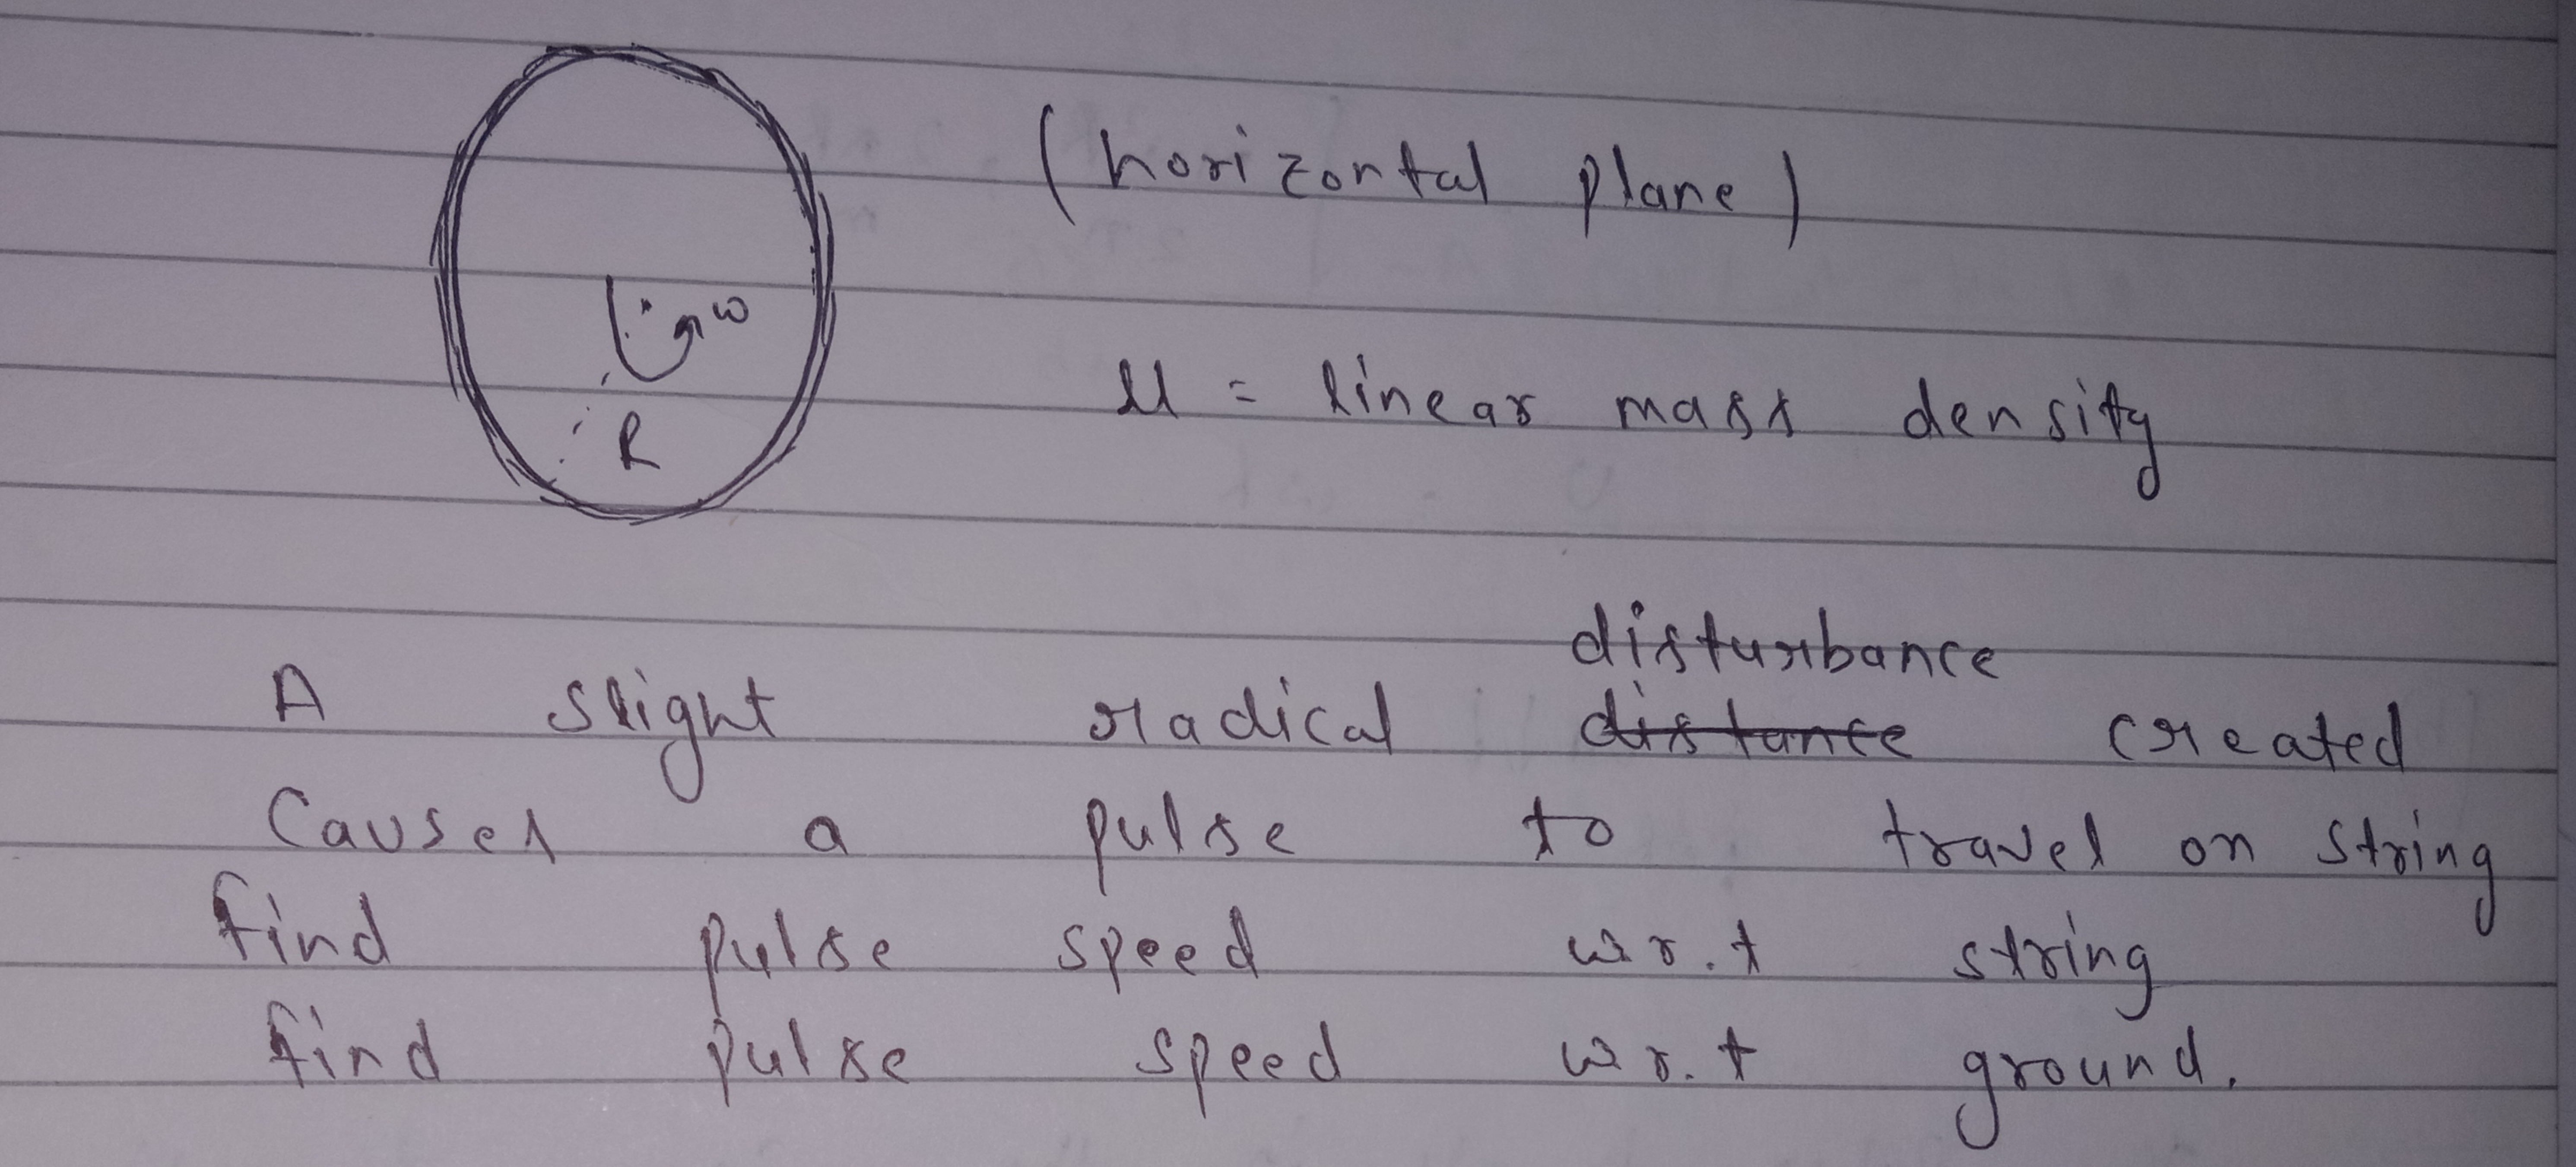 A slight radical Causer a pulse find find
(horizontal plane)
μ= linear